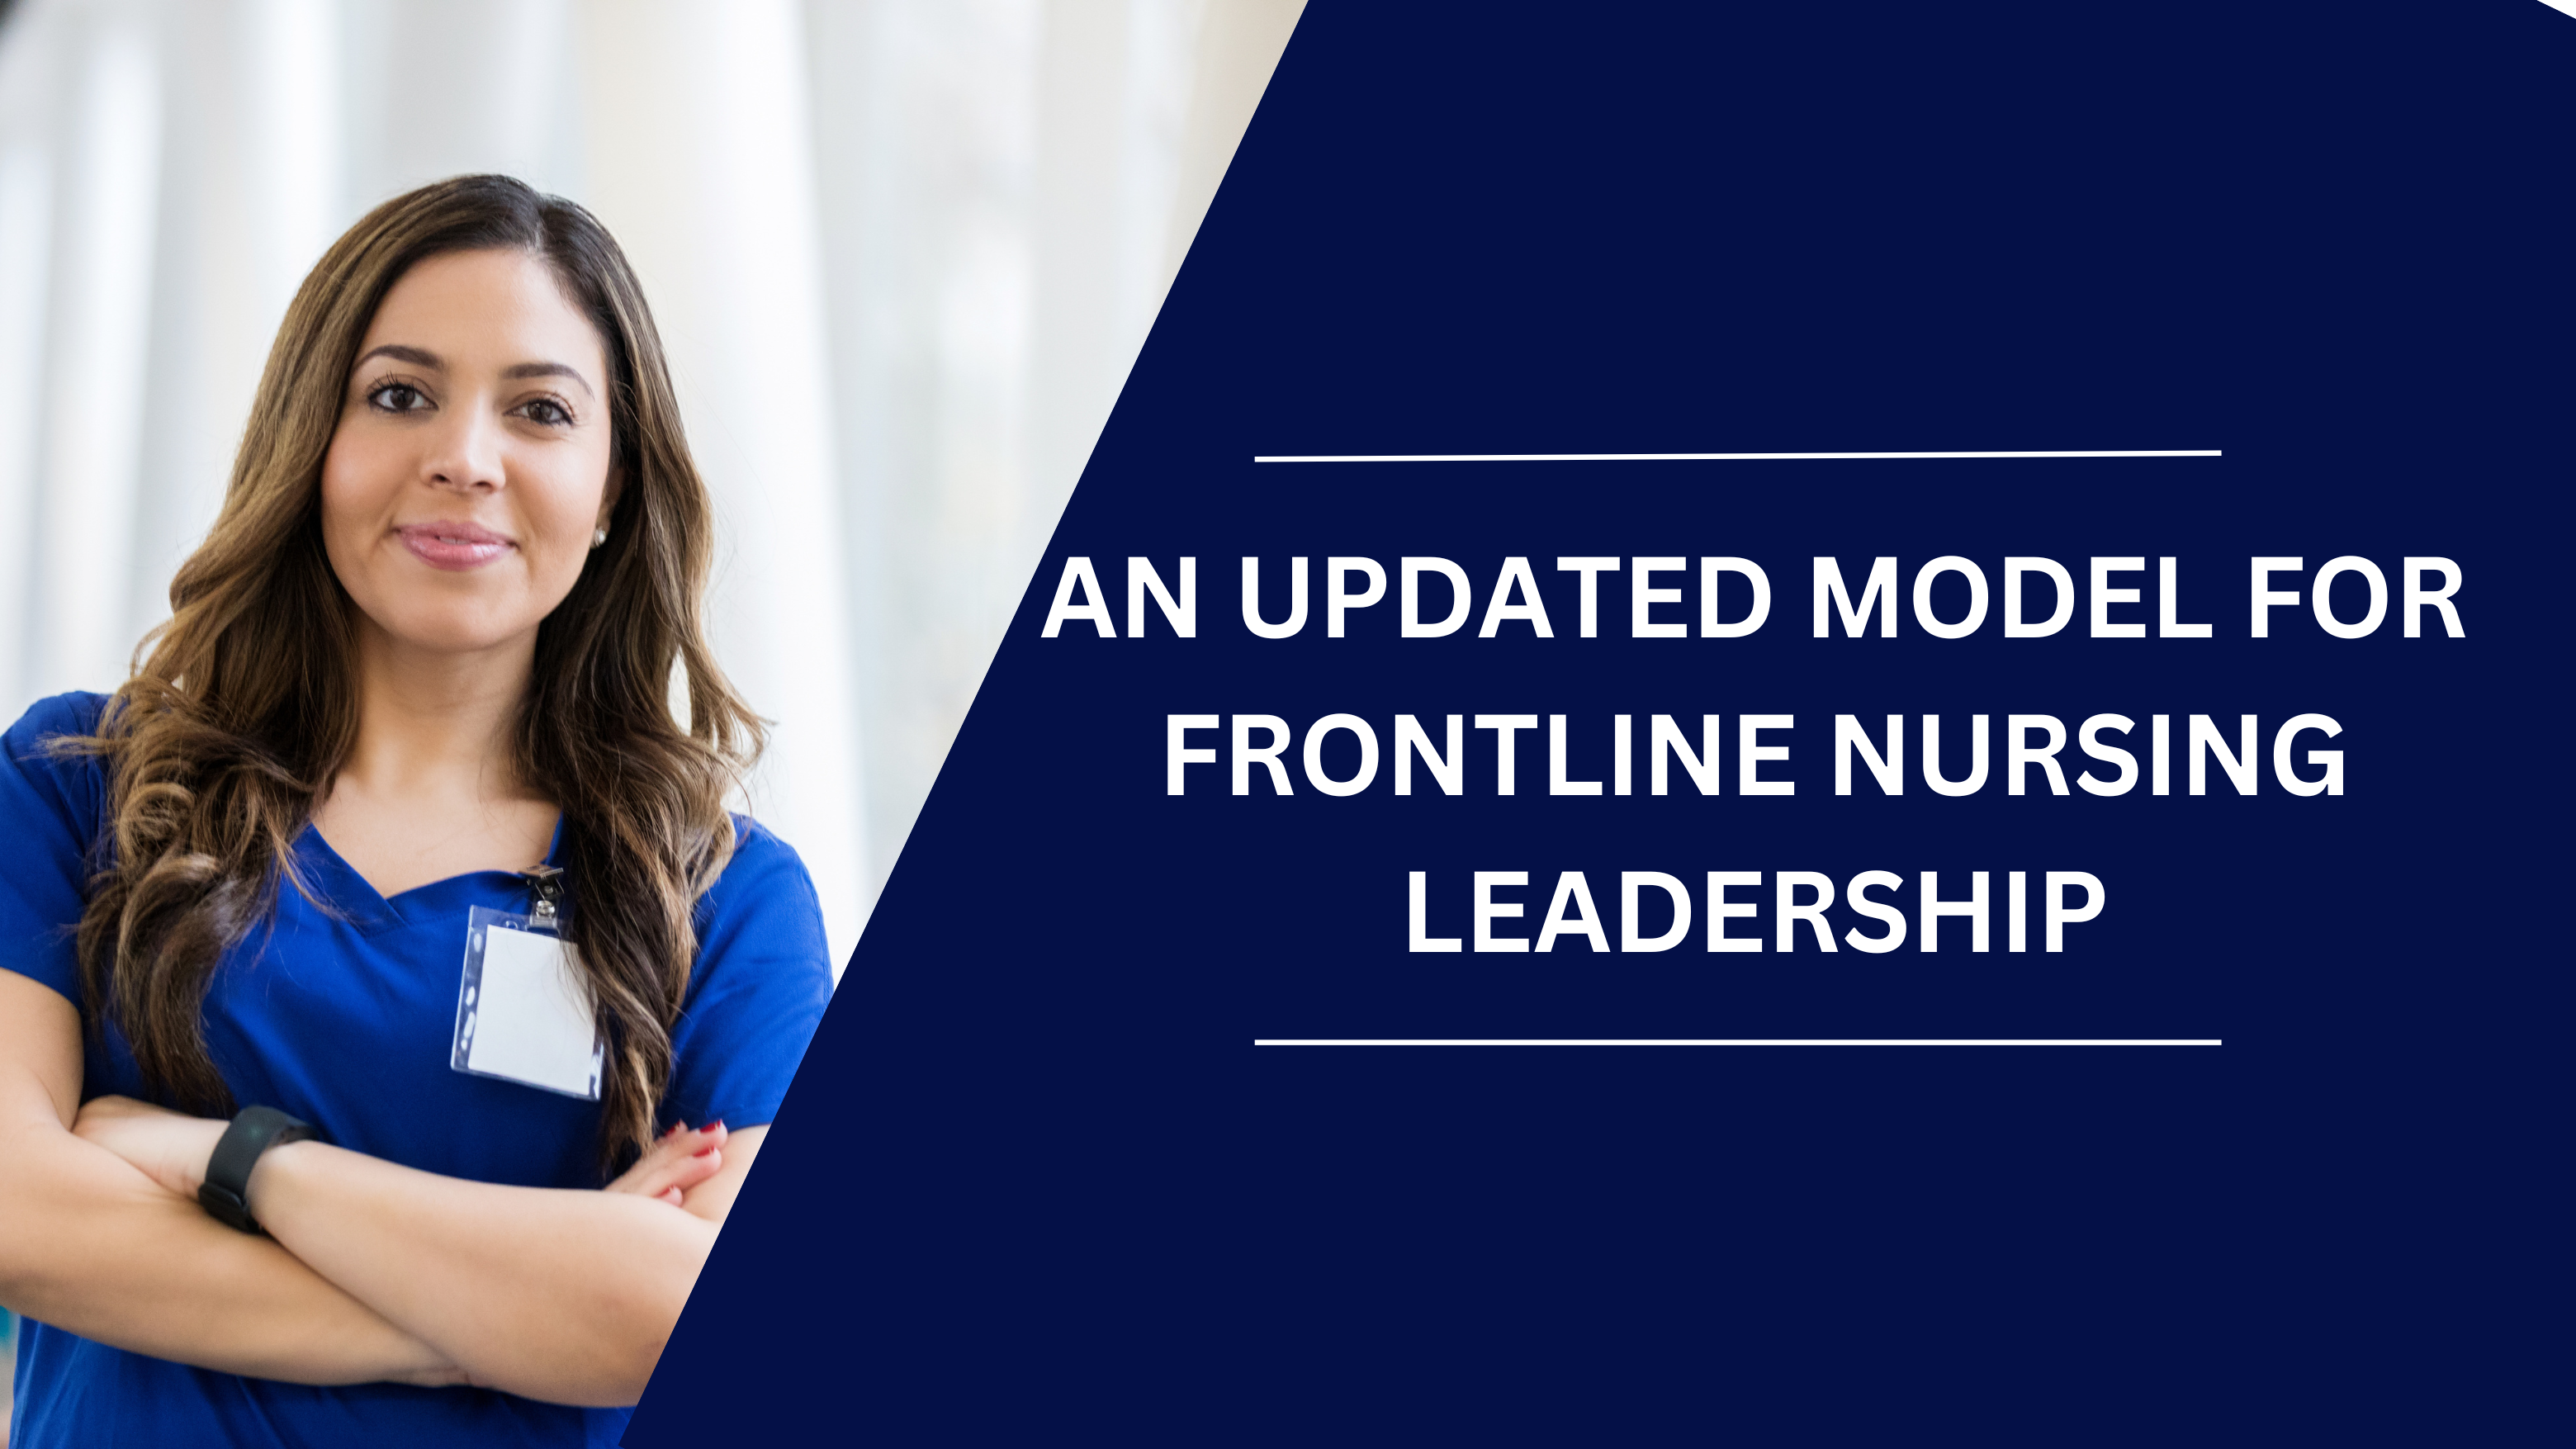 Female nurse wearing blue scrubs next to the title "An Updated Model for Frontline Nursing Leadership